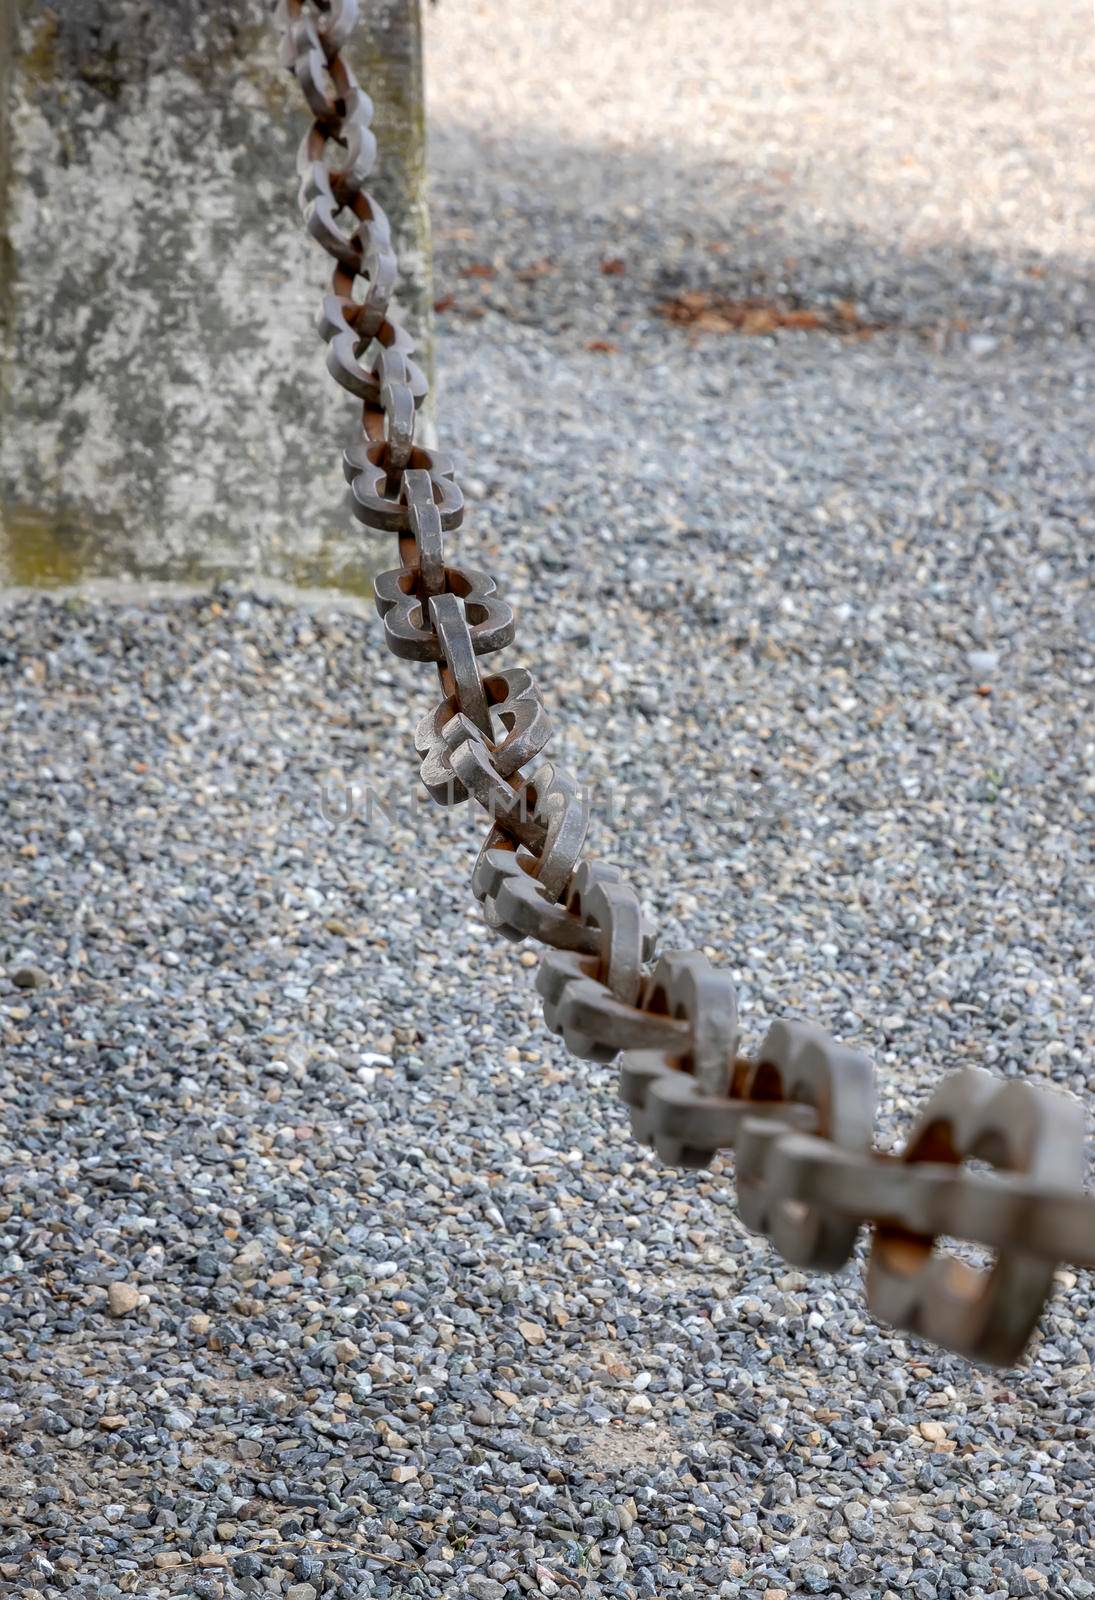 A light gray metal chain made of steel and showing its age is seen up close as it hangs above the broken stone ballast. Selective focus.